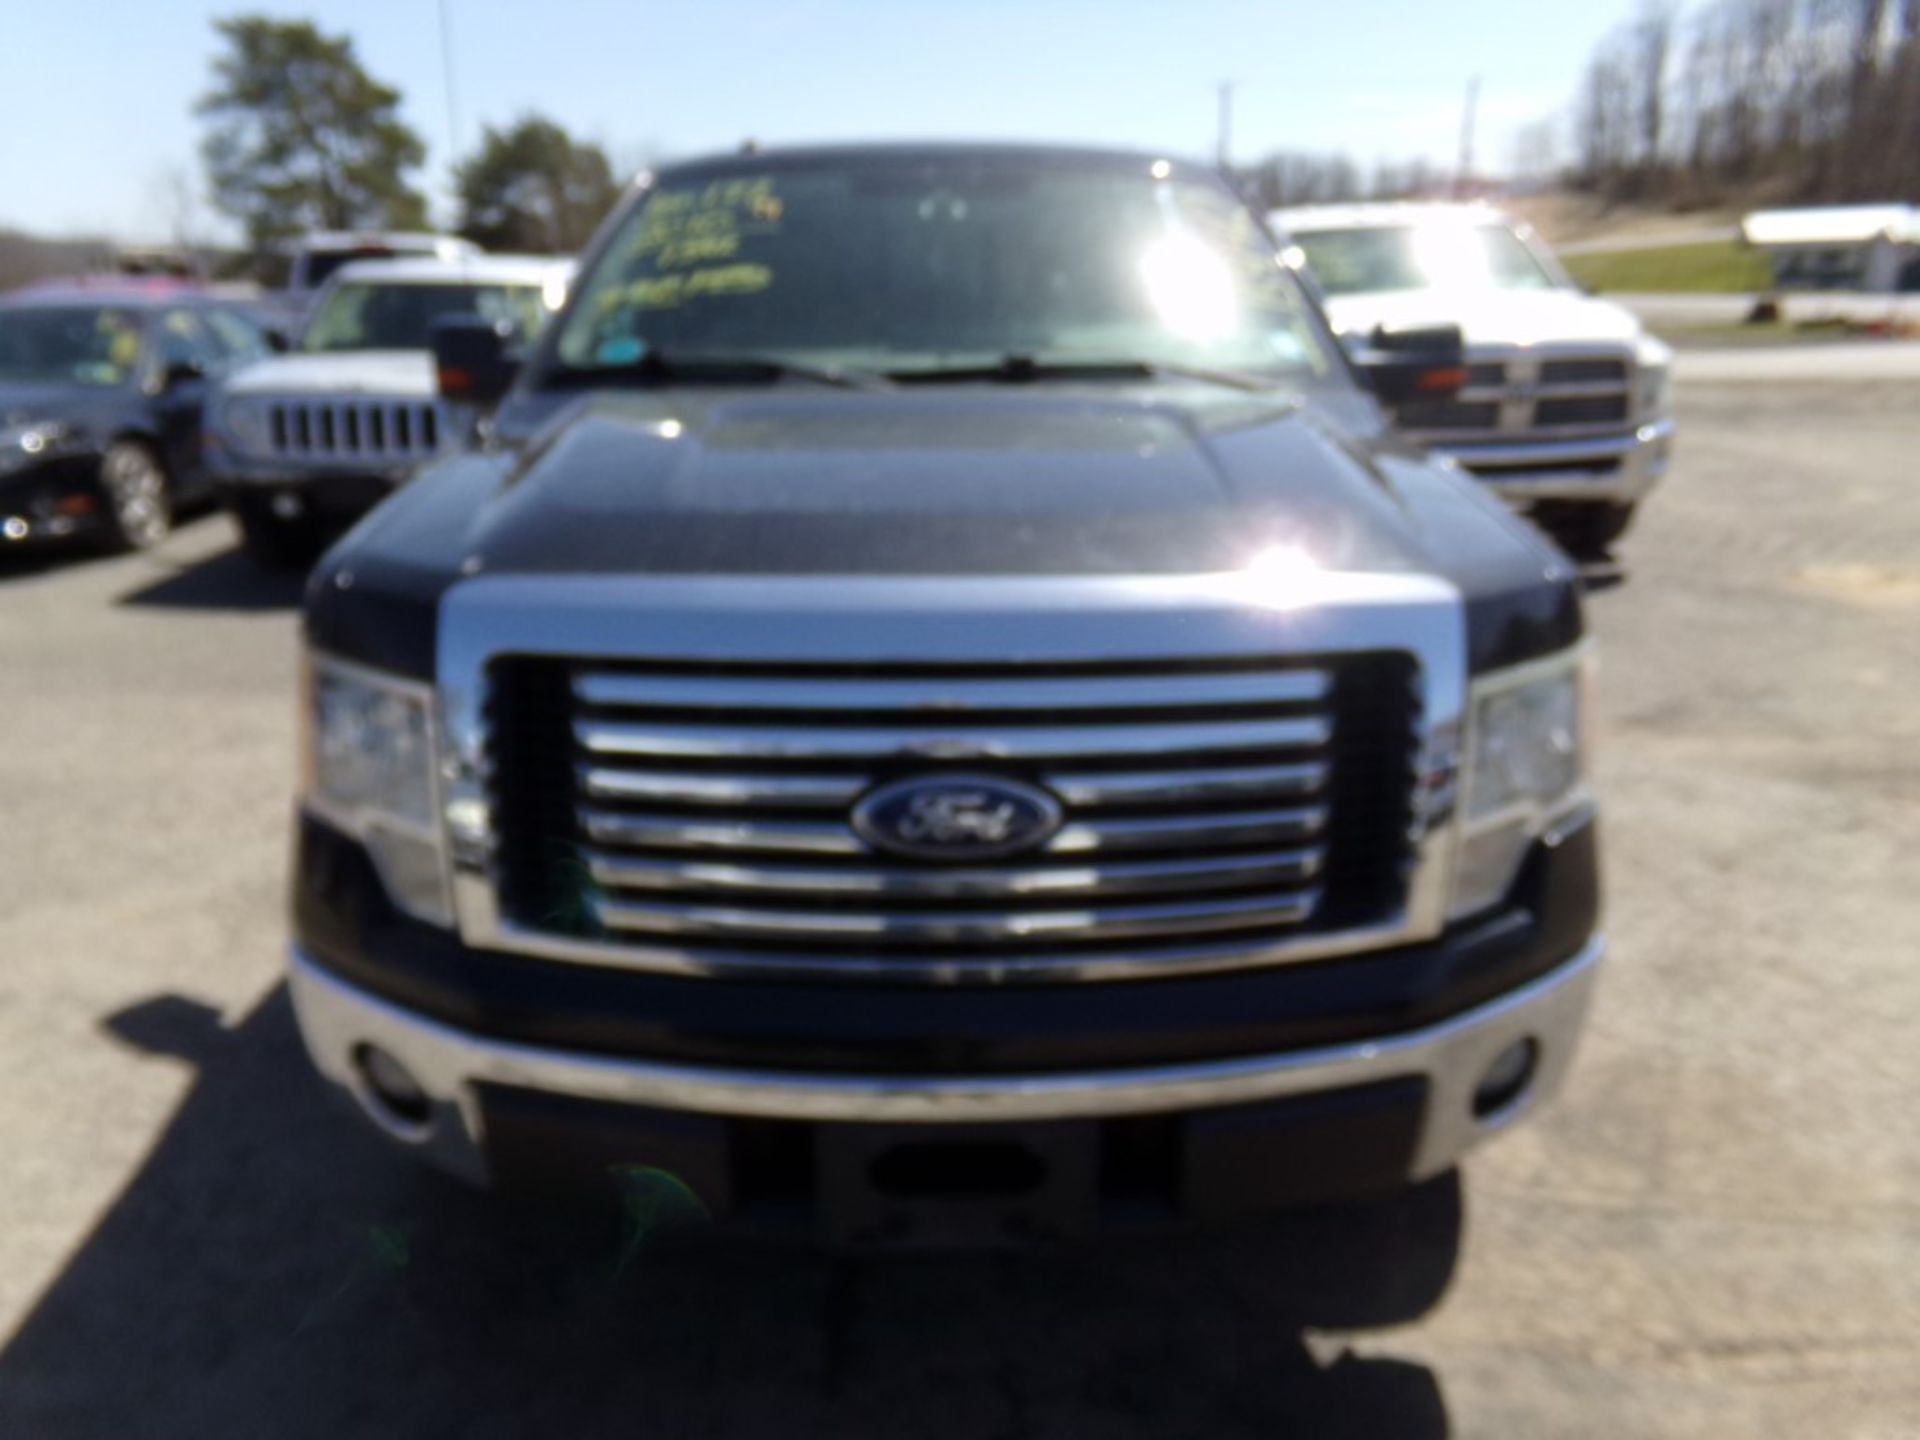 2010 Ford F150 XLT, 4x4 Crew Cab, Black, 154,412 Miles, VIN#:1FTFW1EV3AFD37943, AGGRESSIVE TIRES ARE - Image 4 of 7